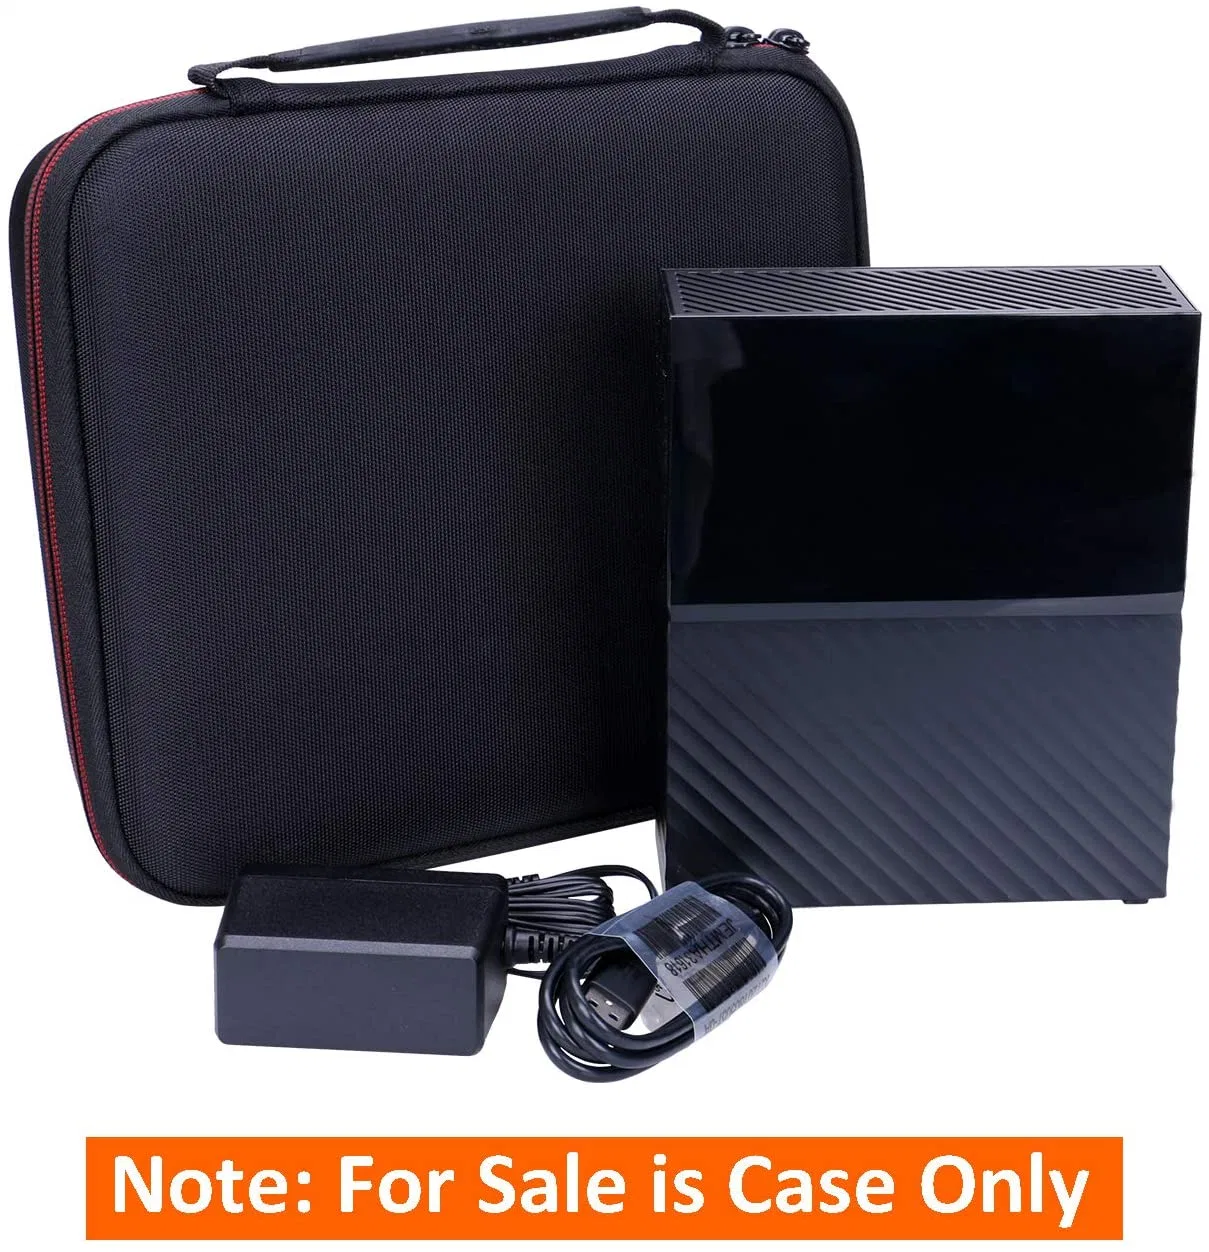 Protective Carry Zipper Travel Waterproof Shockproof Smell Proof 1680d Nylon Tool Black EVA Storage Box Pouch Packing EVA Bags Case for Hard Drive